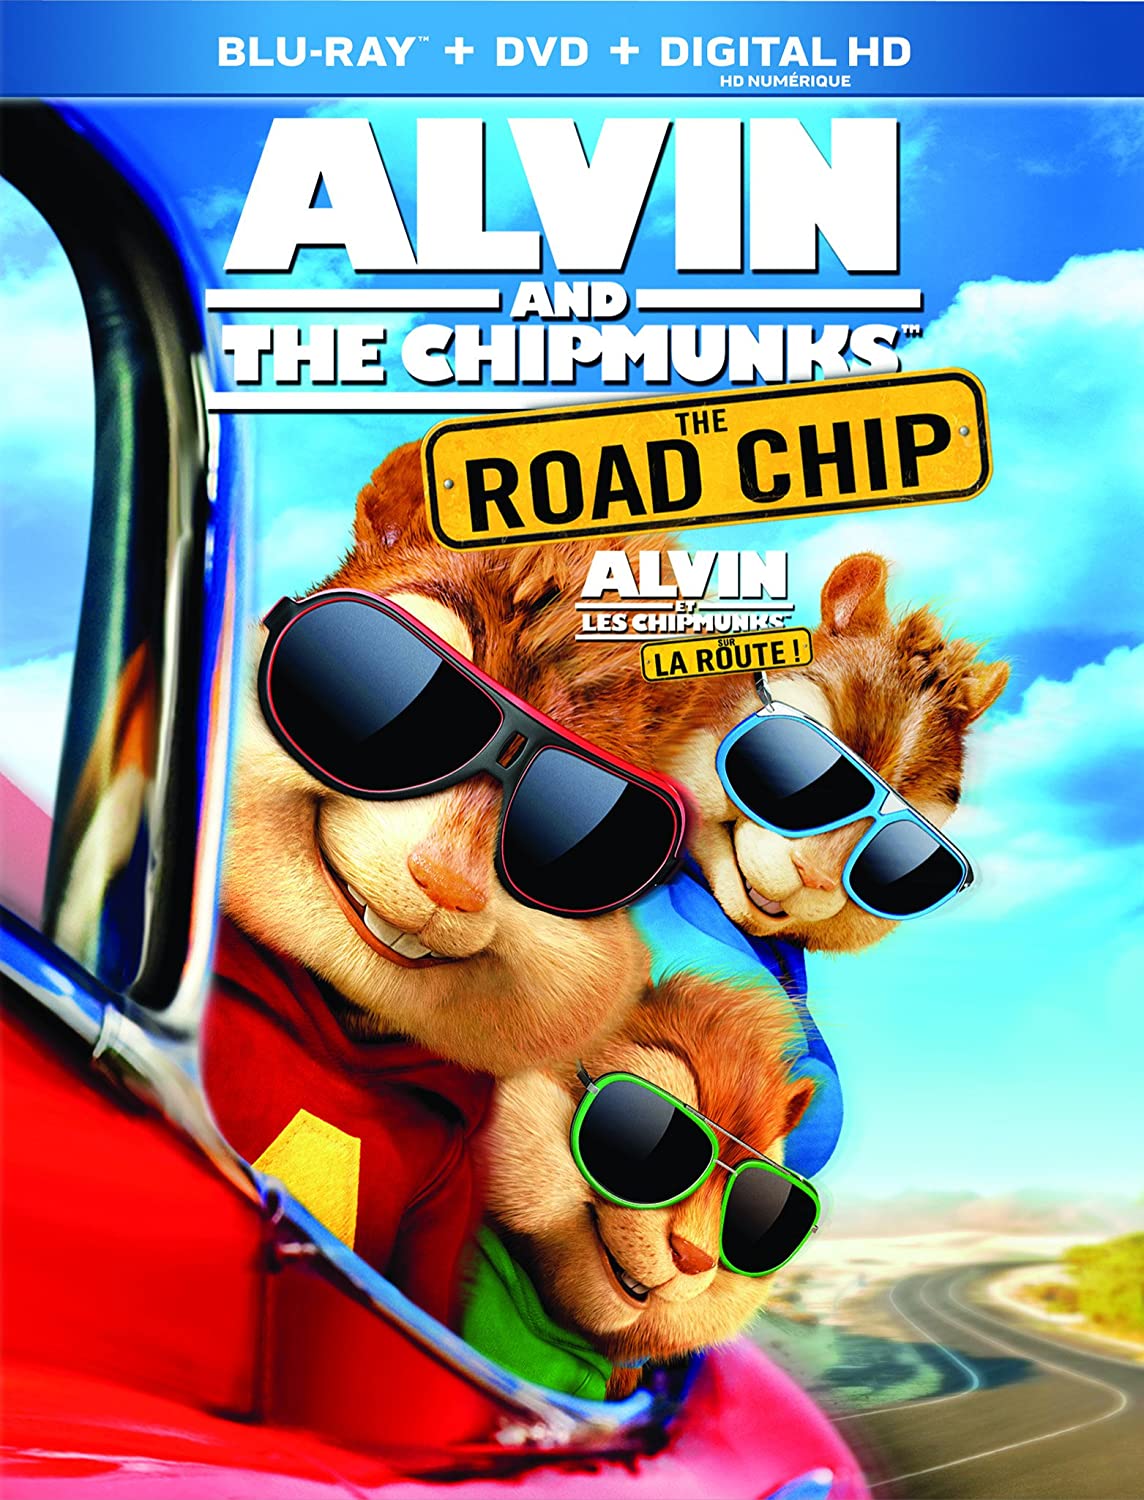 Alvin and the Chipmunks: The Road Chip ICON (Bilingual) [Blu-ray + DVD + Digital Copy] [Blu-ray]